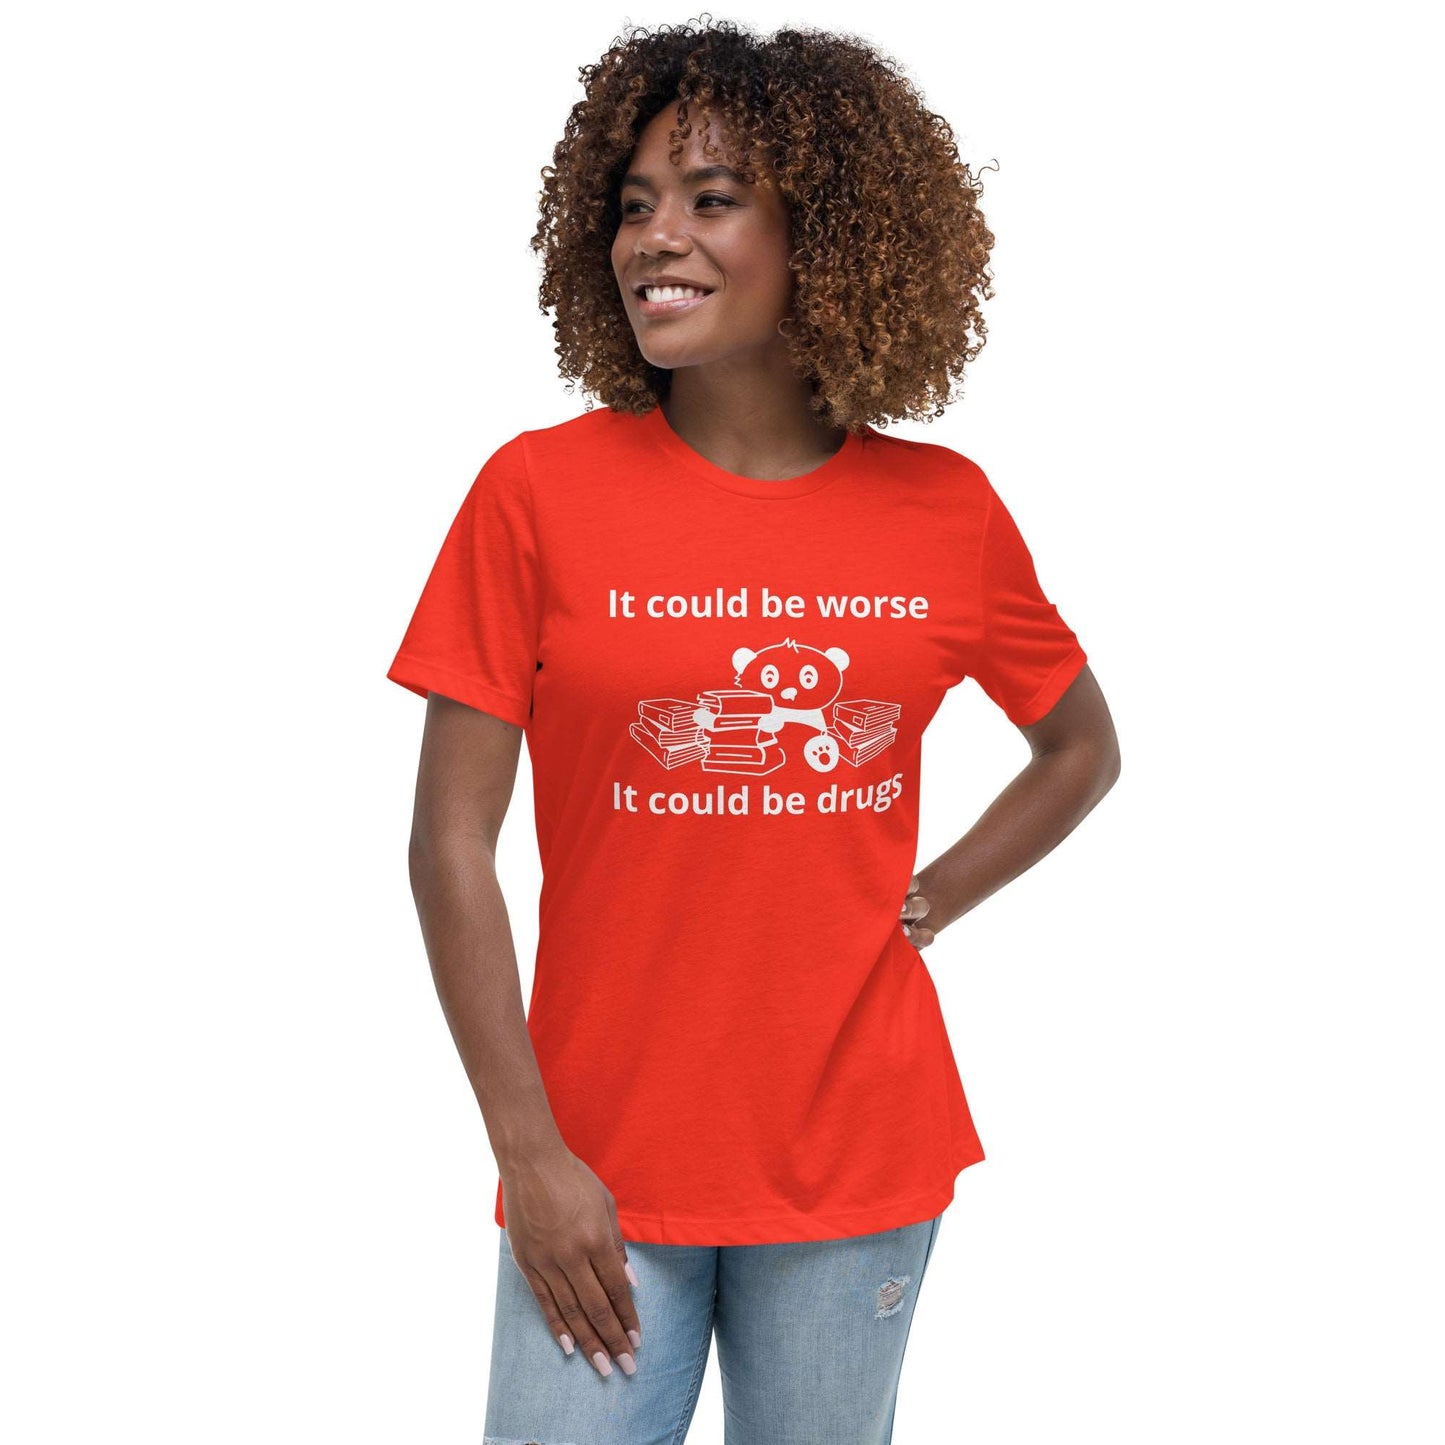 It could be worse Women's Relaxed T-Shirt